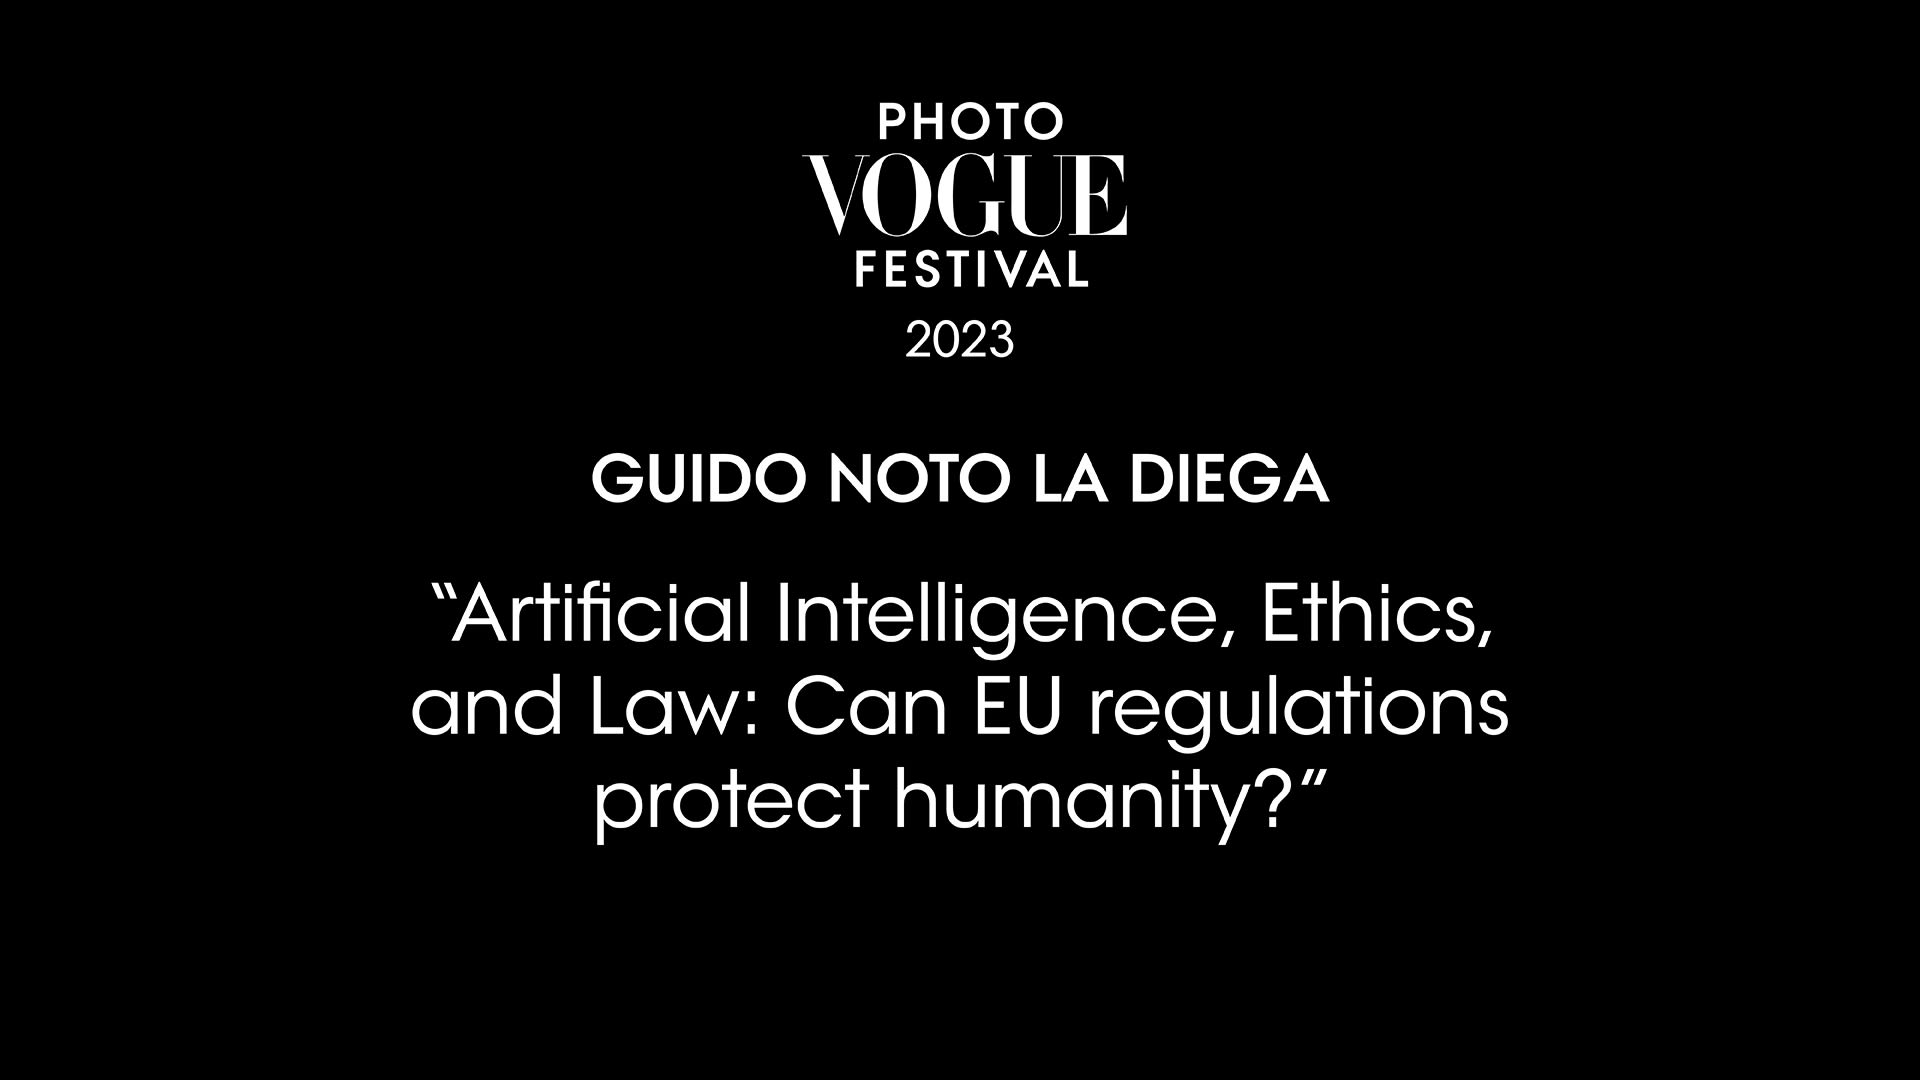 Artificial Intelligence, Ethics, and Law: Can EU regulations protect humanity? | PhotoVogue Festival 2023: What Makes Us Human? Image in the Age of A.I.